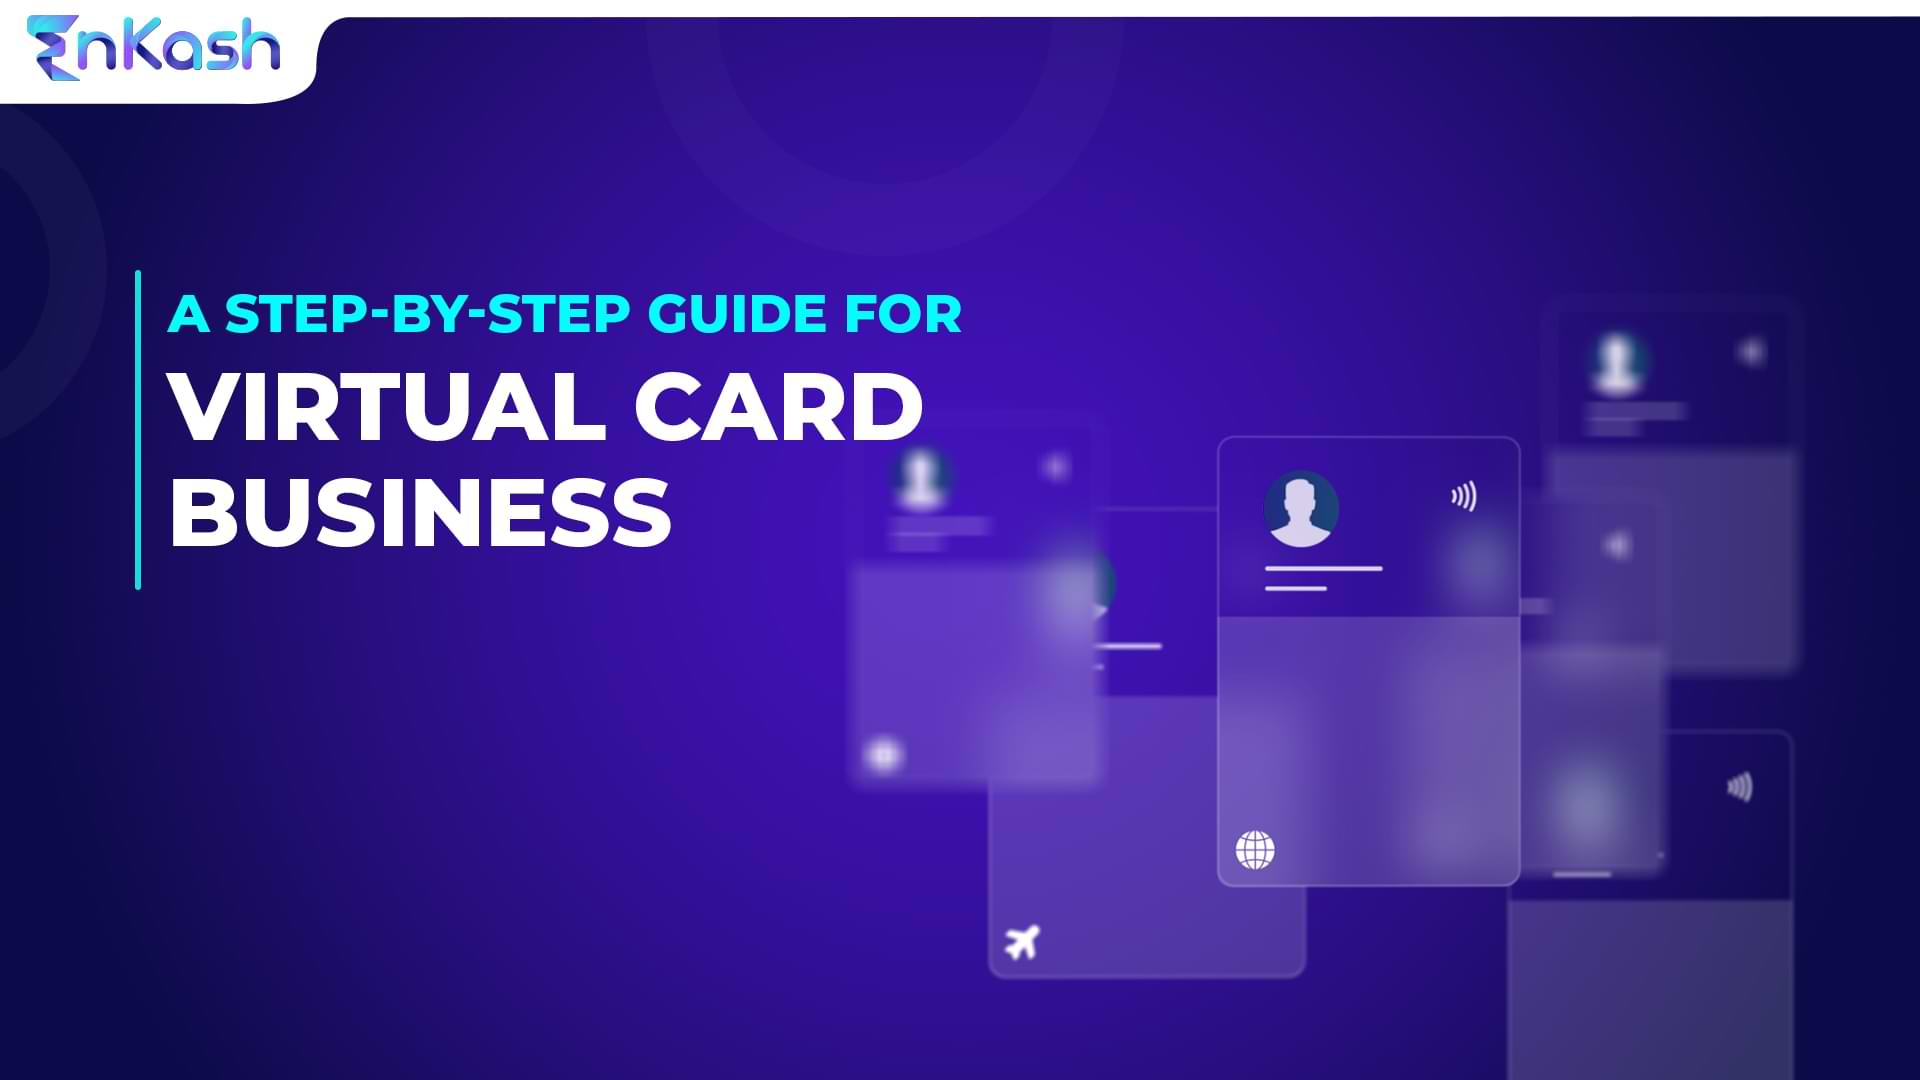 A Step-by-Step Guide for Virtual Card Business